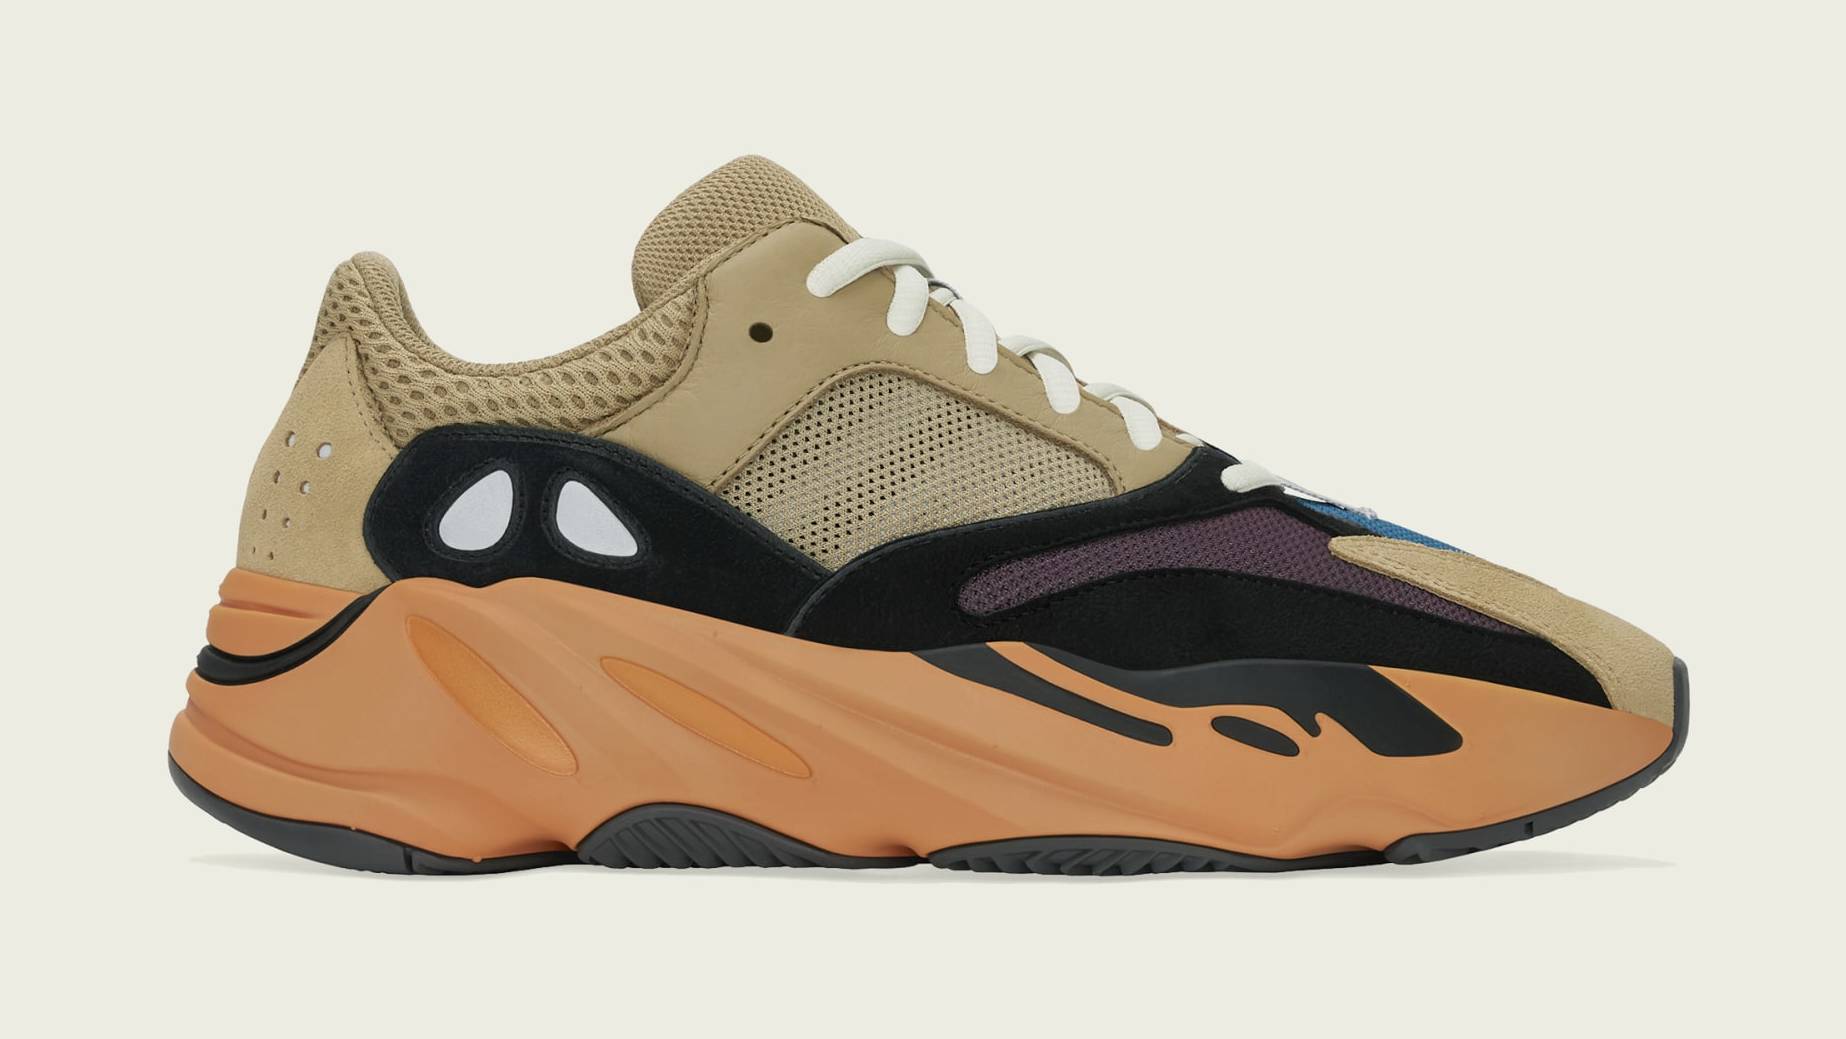 Enflame Yeezy 700 a Confirmed Release Date |